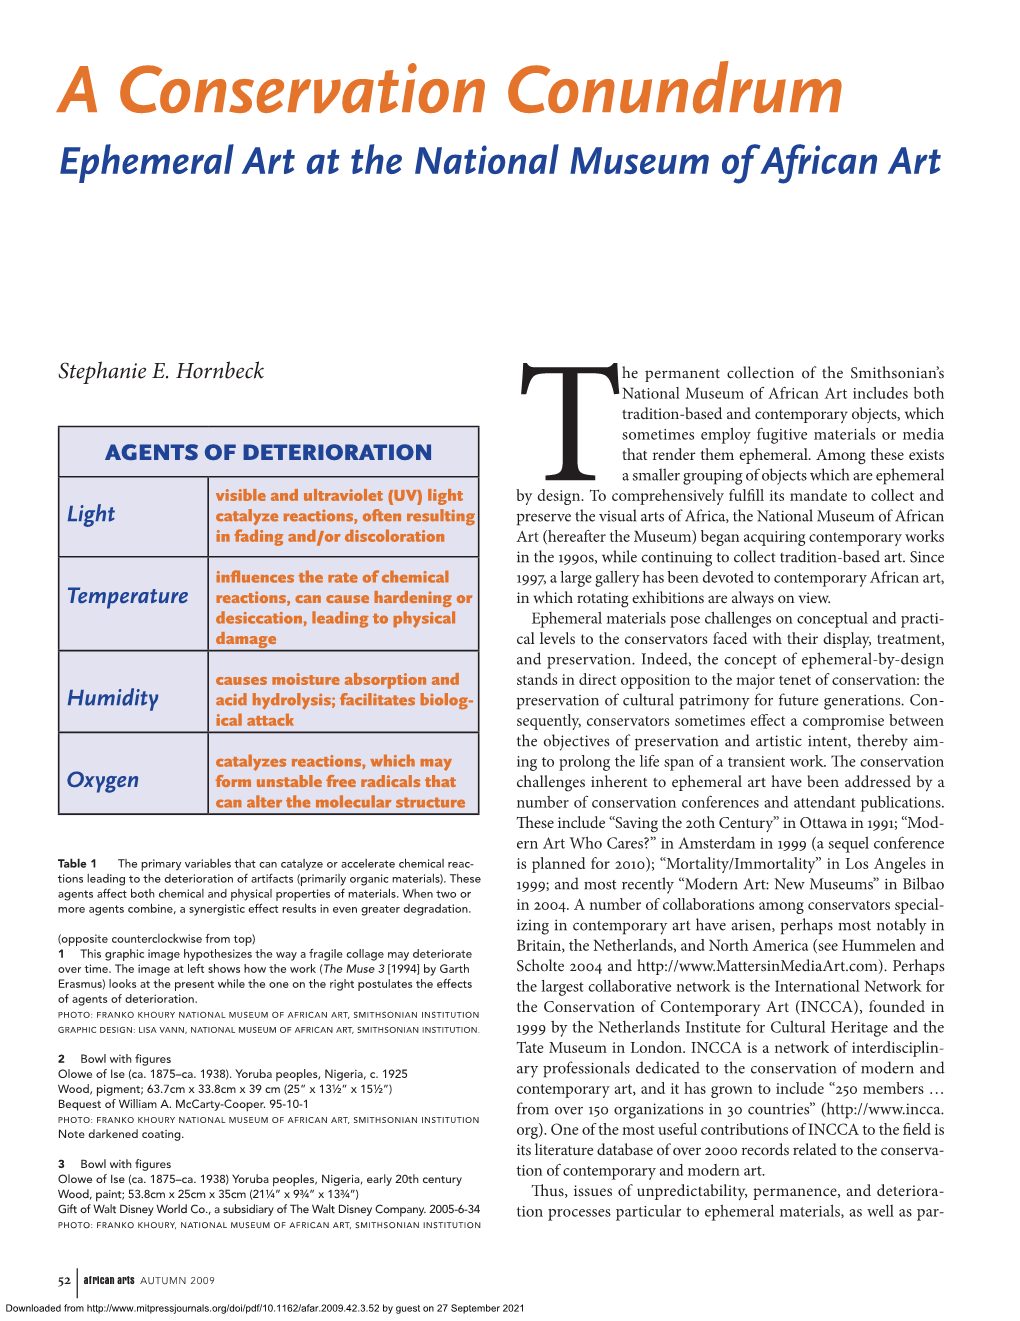 A Conservation Conundrum Ephemeral Art at the National Museum of African Art